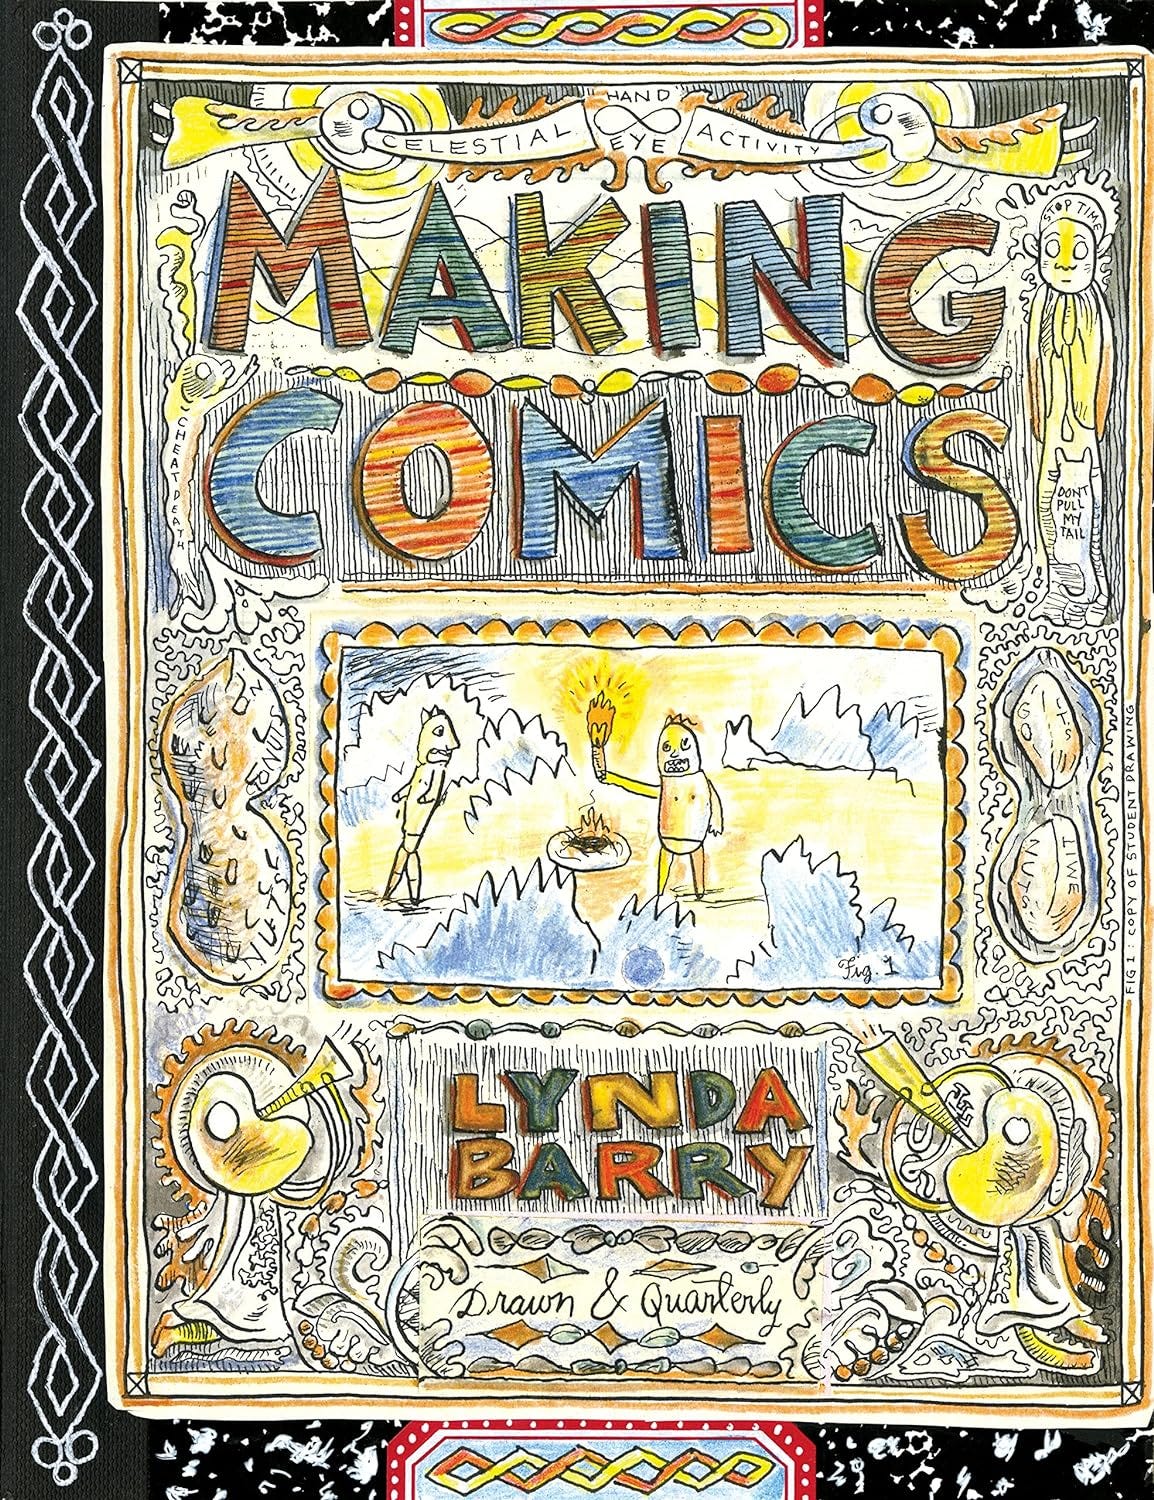 Making Comics book looks like a composition notebook with hand drawn title and doodles all over. The main image is a figure holding a torch. Author is Lynda Barry.